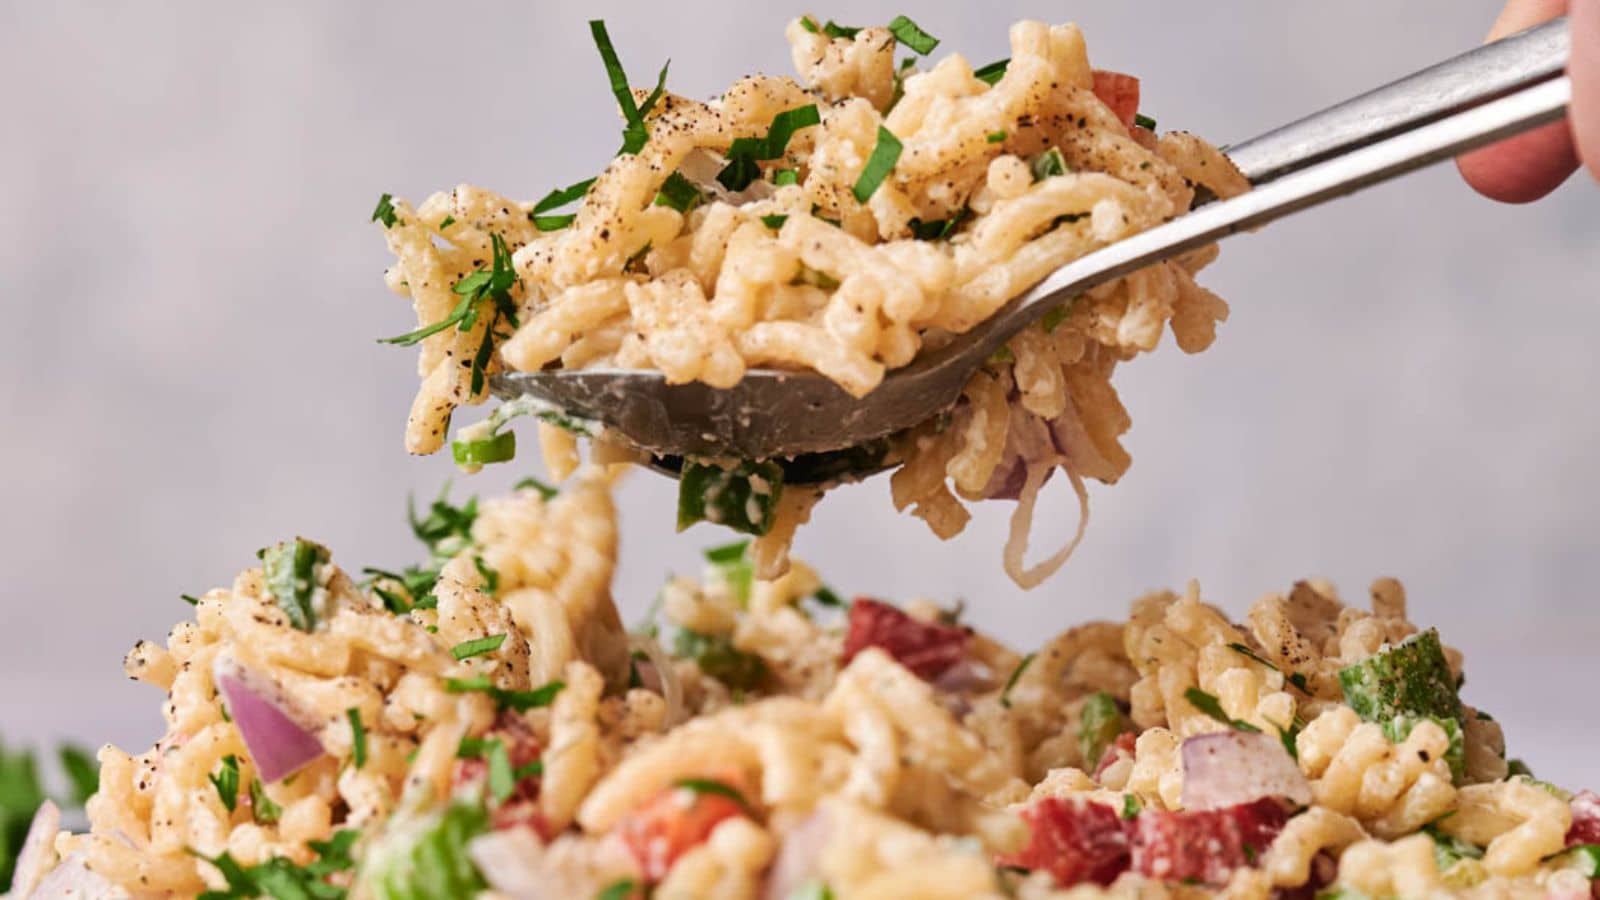 <p>Our Macaroni Salad is a wonderful side dish that complements any barbecue or picnic. It's creamy and packed with flavors that mingle perfectly in your mouth. Enjoy it chilled for a refreshing taste on a hot day. It's also easy to make ahead for gatherings.<br><strong>Get the Recipe: </strong><a href="https://www.splashoftaste.com/best-macaroni-salad-recipe/?utm_source=msn&utm_medium=page&utm_campaign=">Macaroni Salad</a></p>